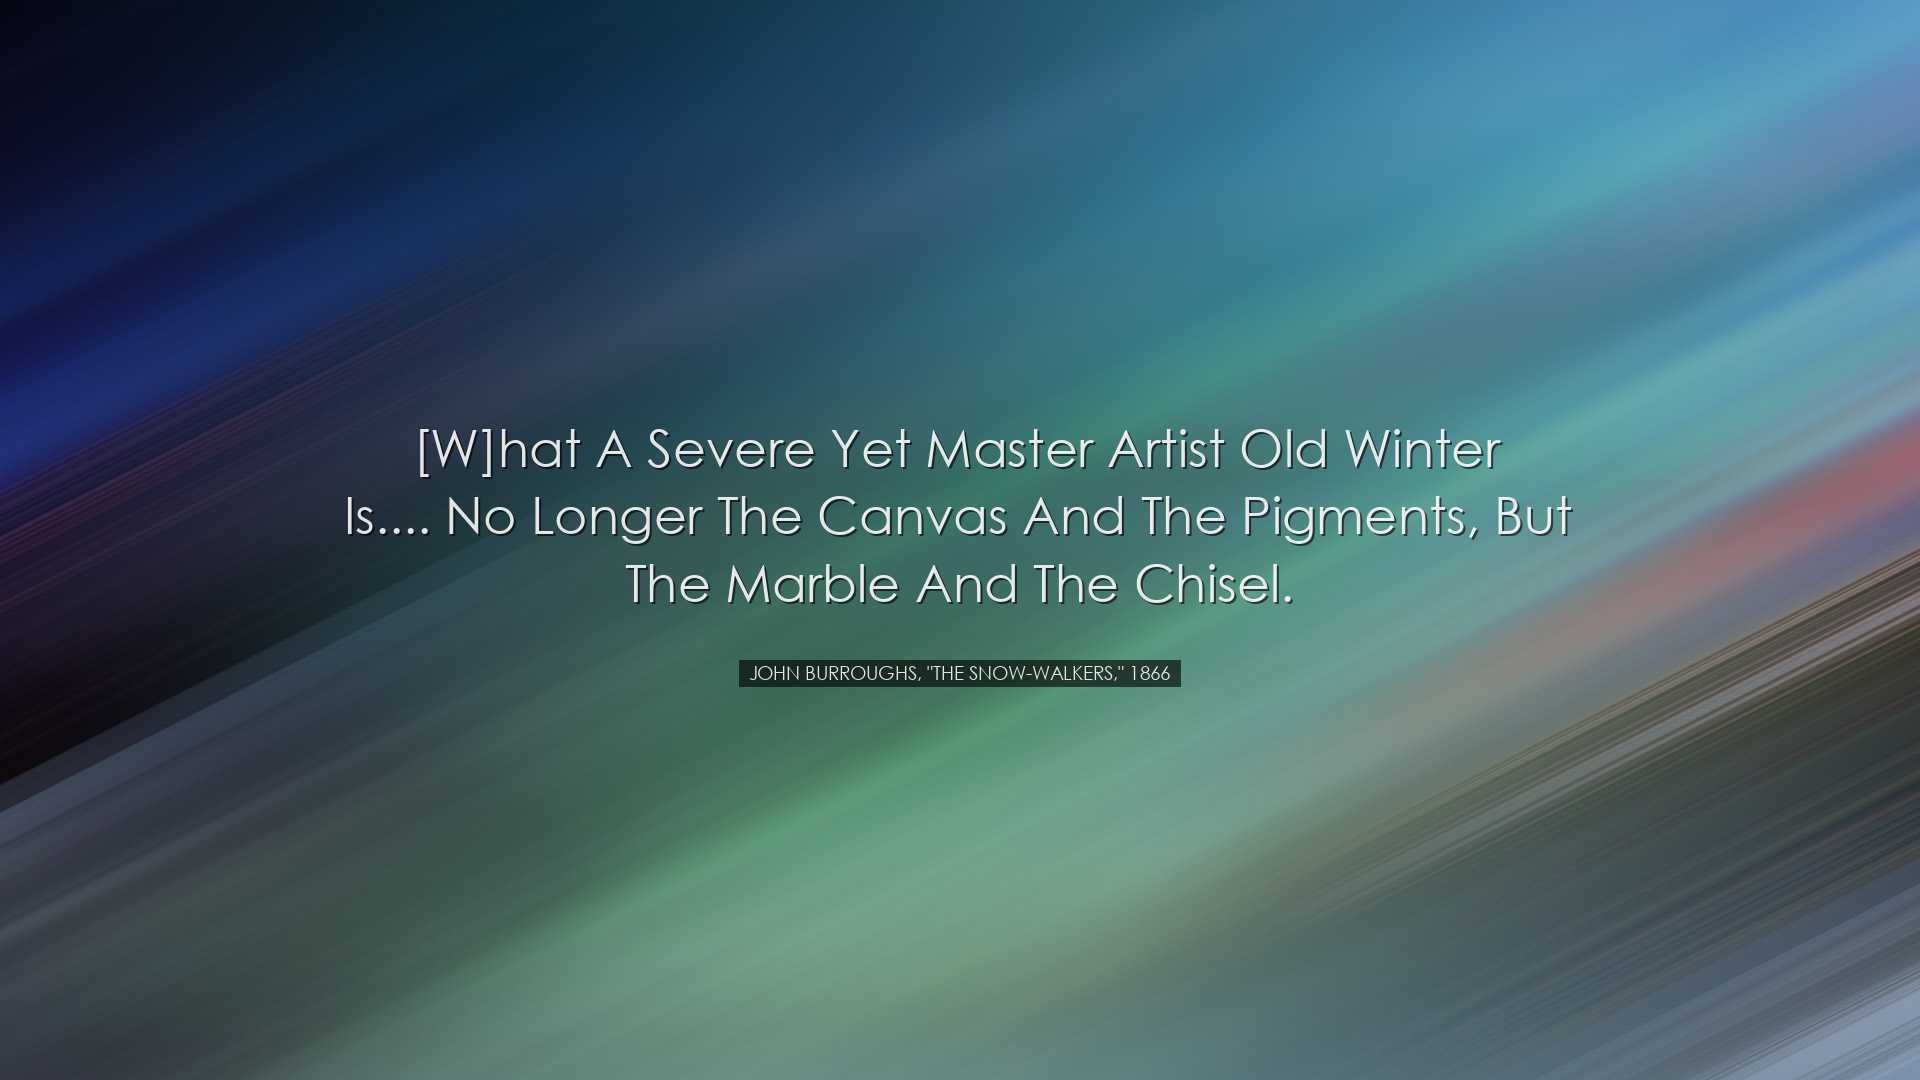 [W]hat a severe yet master artist old Winter is.... No longer the